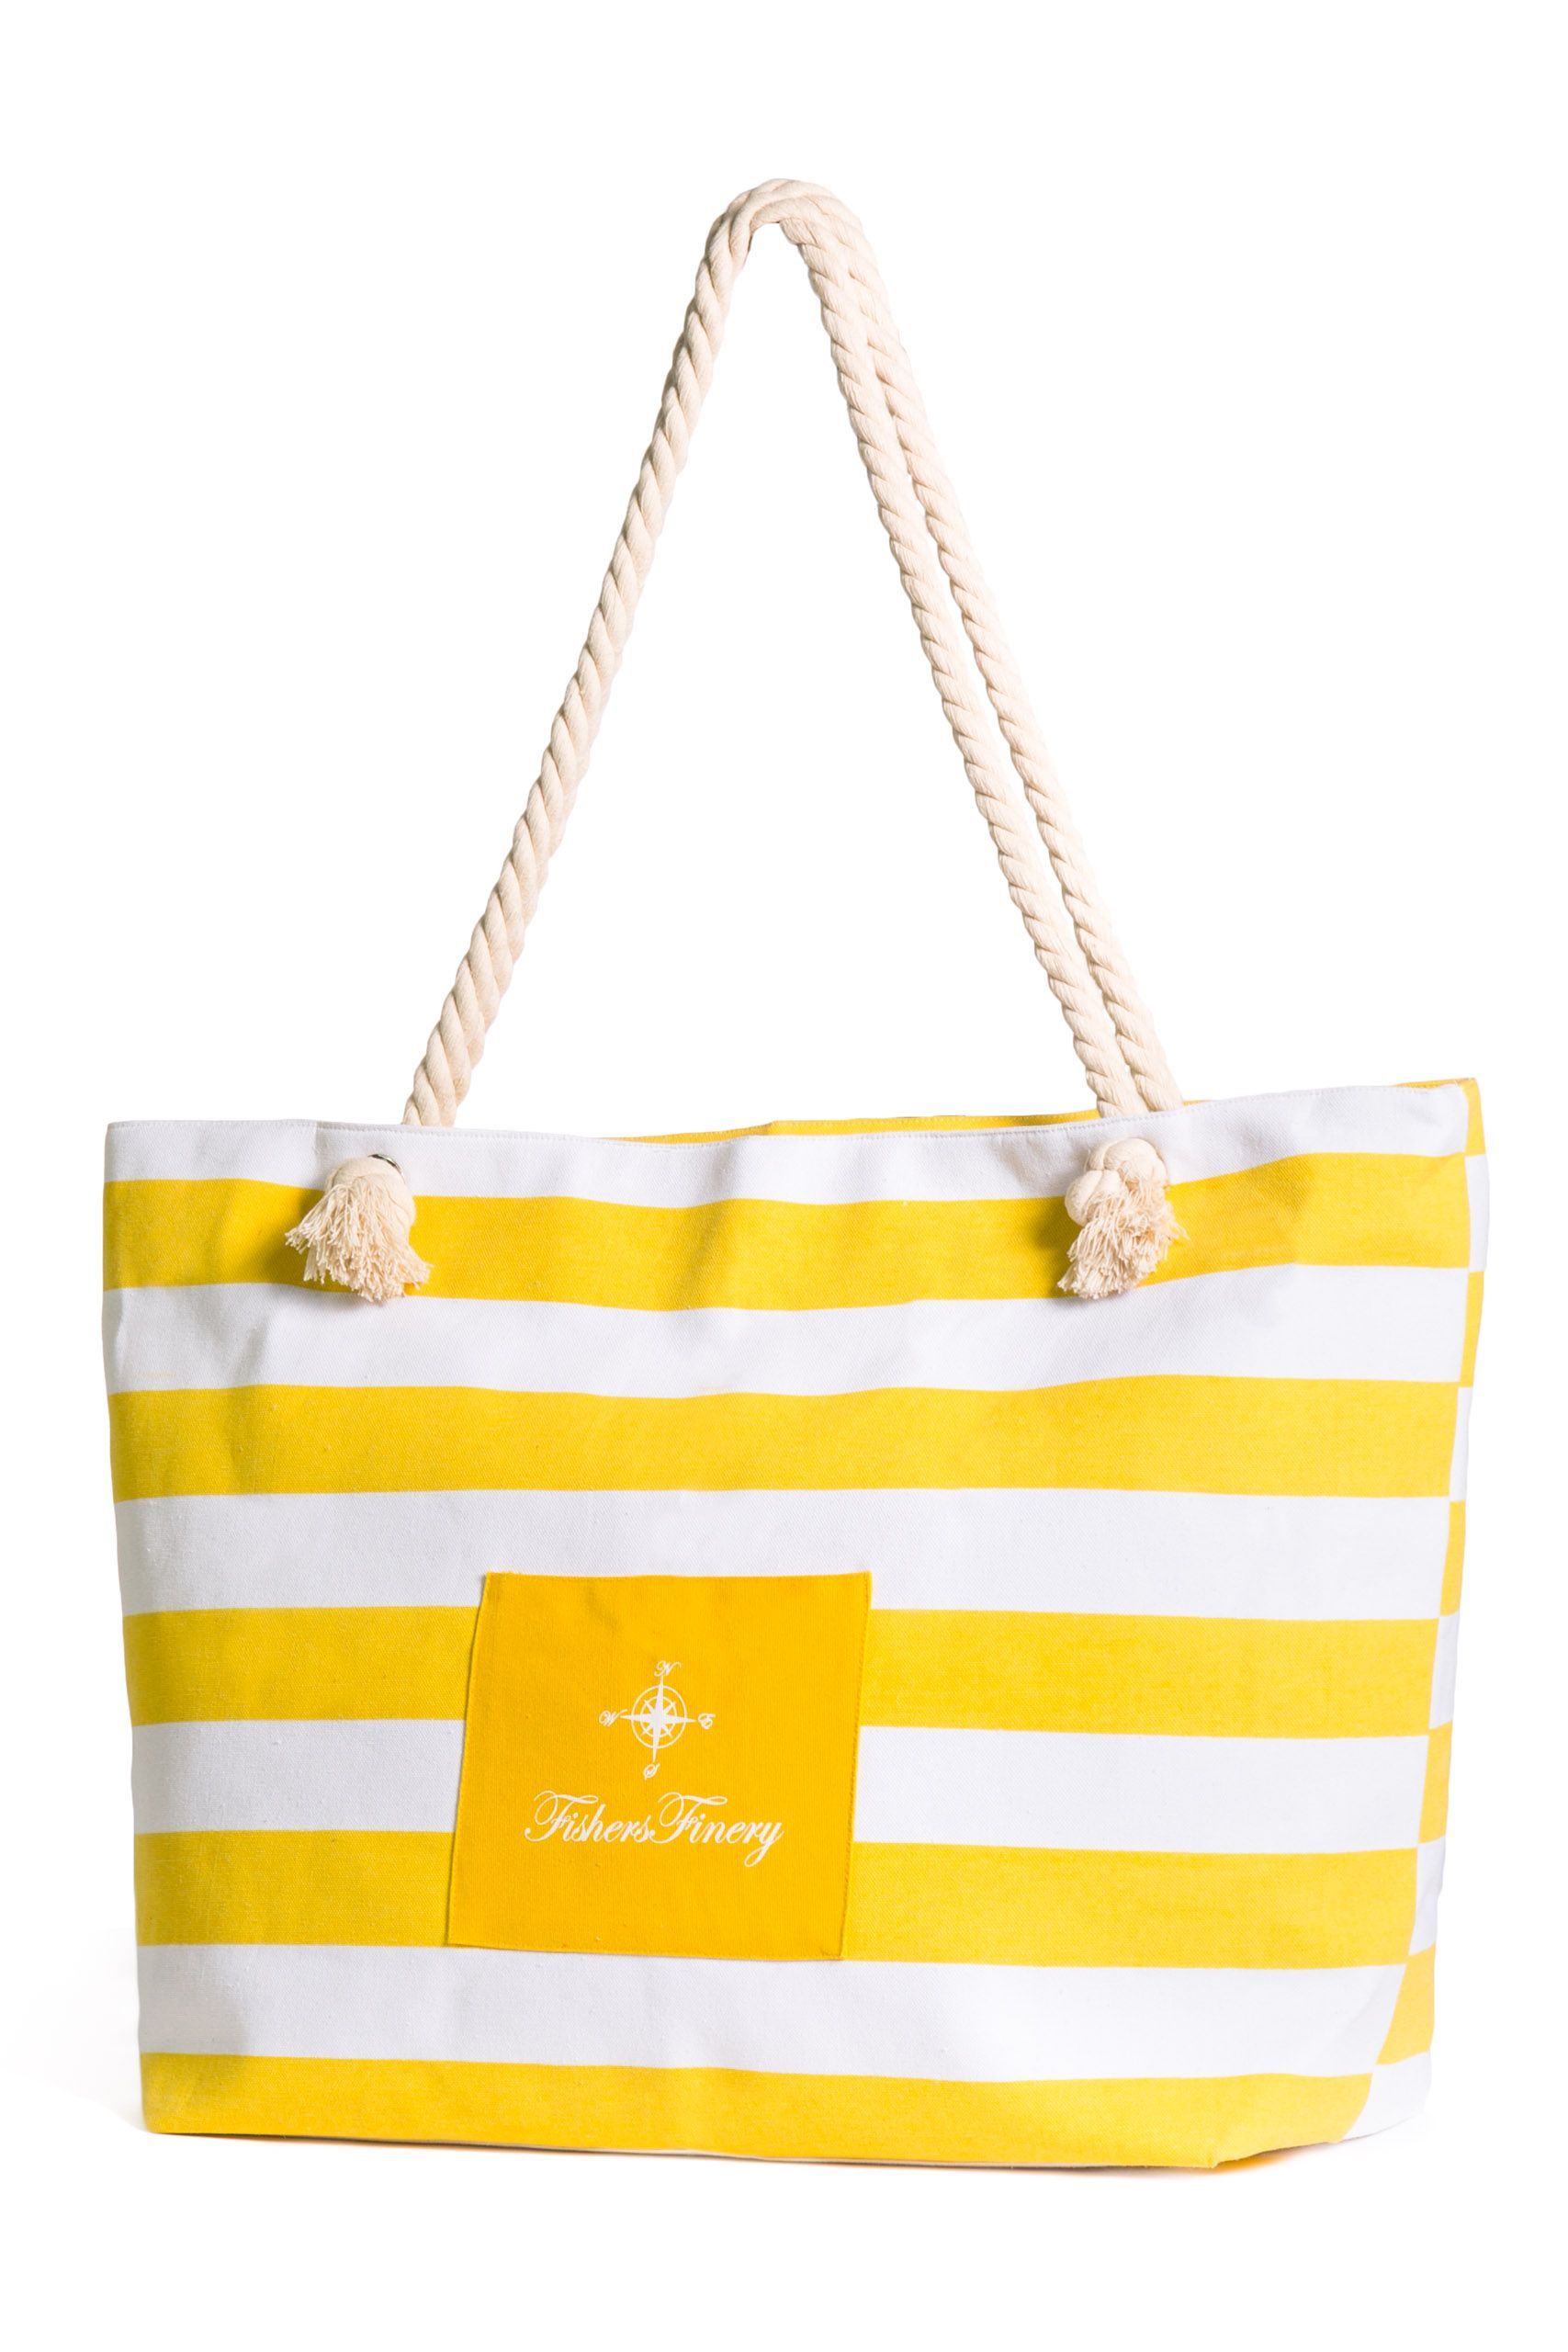 Heavy Canvas Beach Bag - Water Resistant Lining Home>Luggage Fishers Finery Yellow Family 